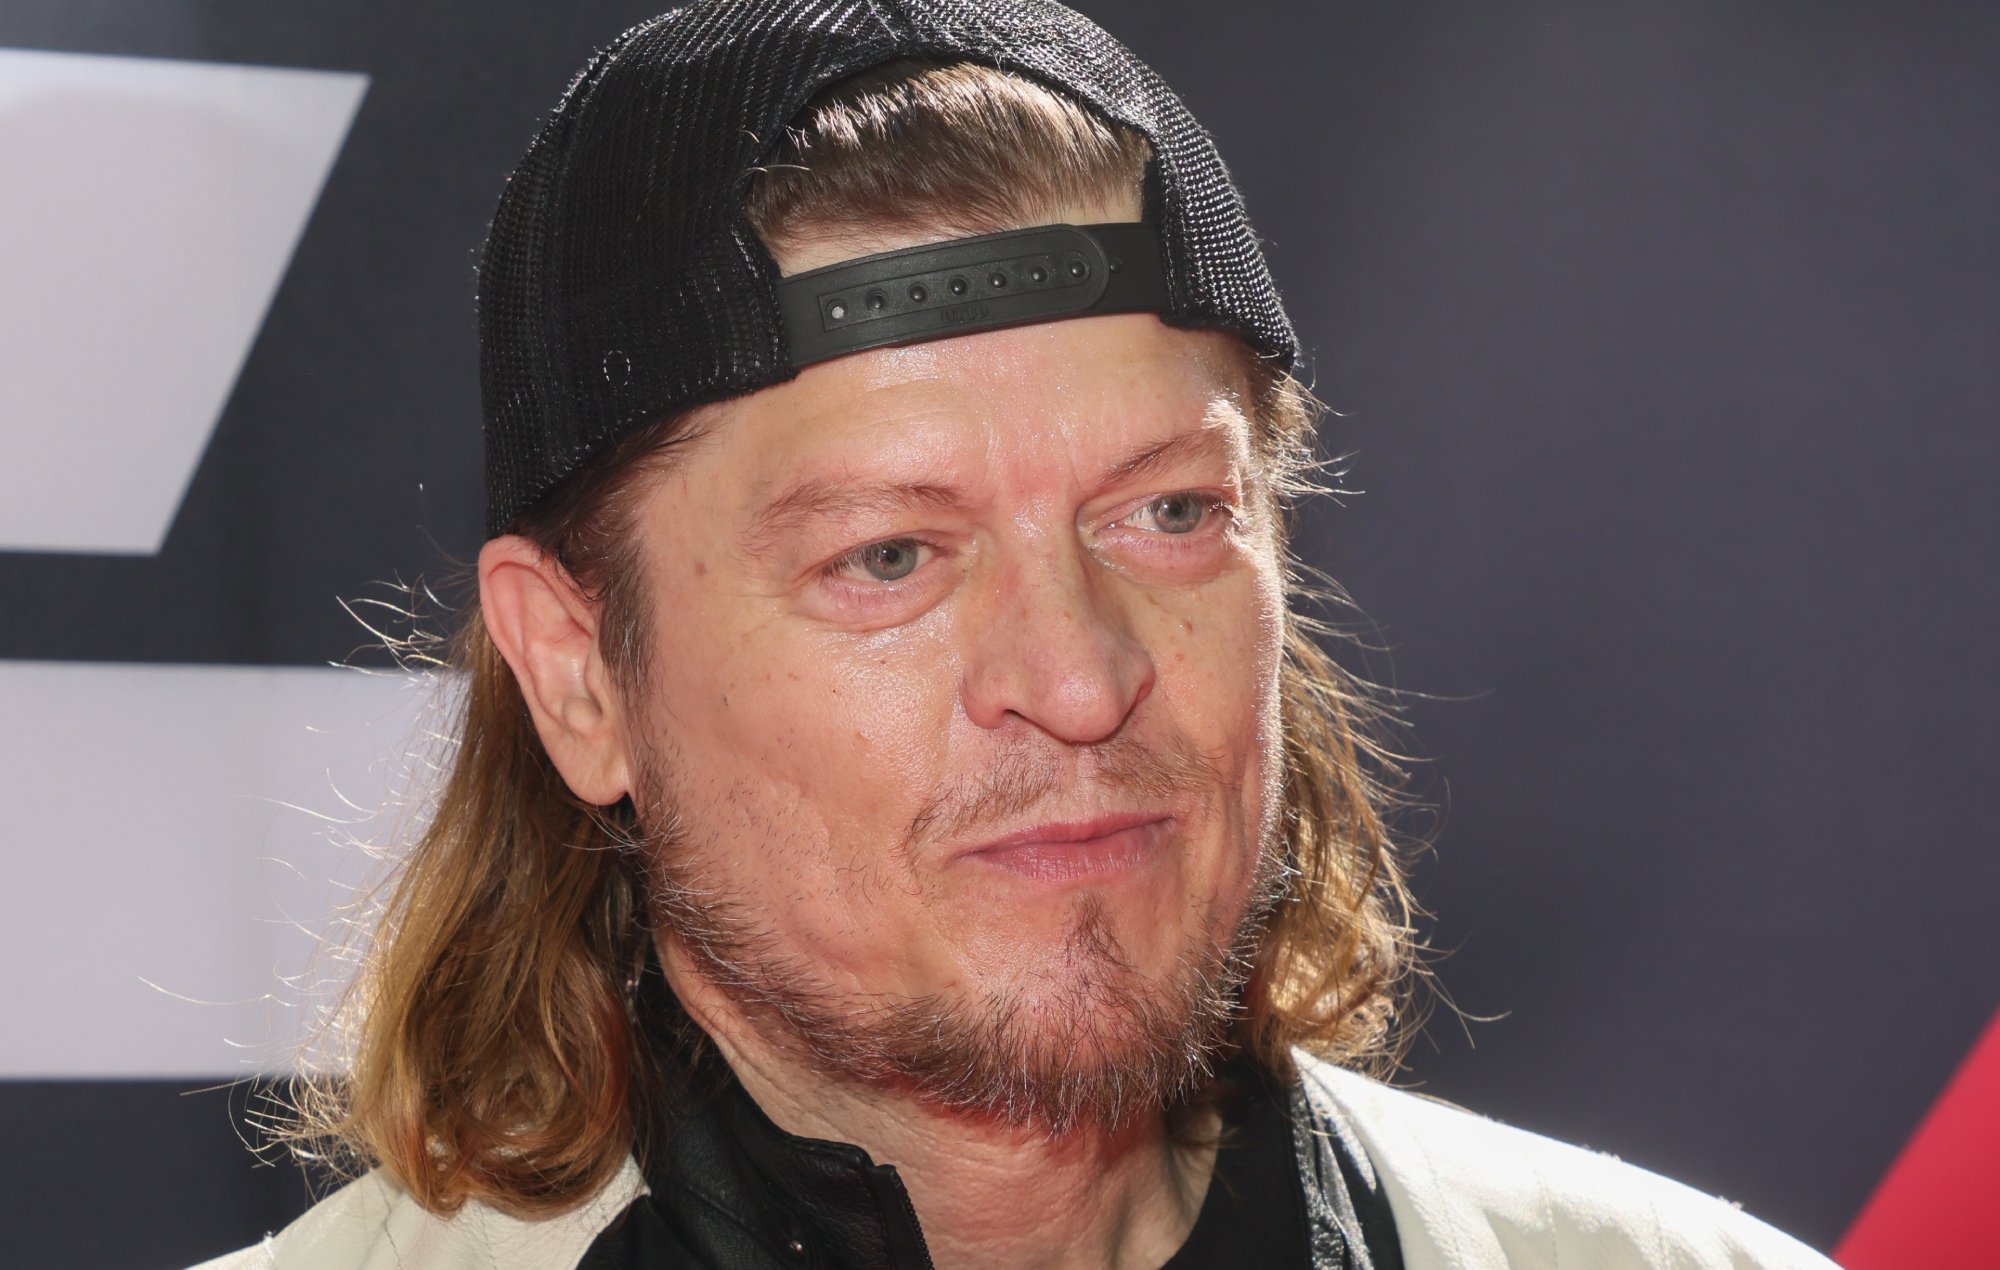 Puddle of Mudd frontman Wes Scantlin arrested and pepper sprayed after police stand-off